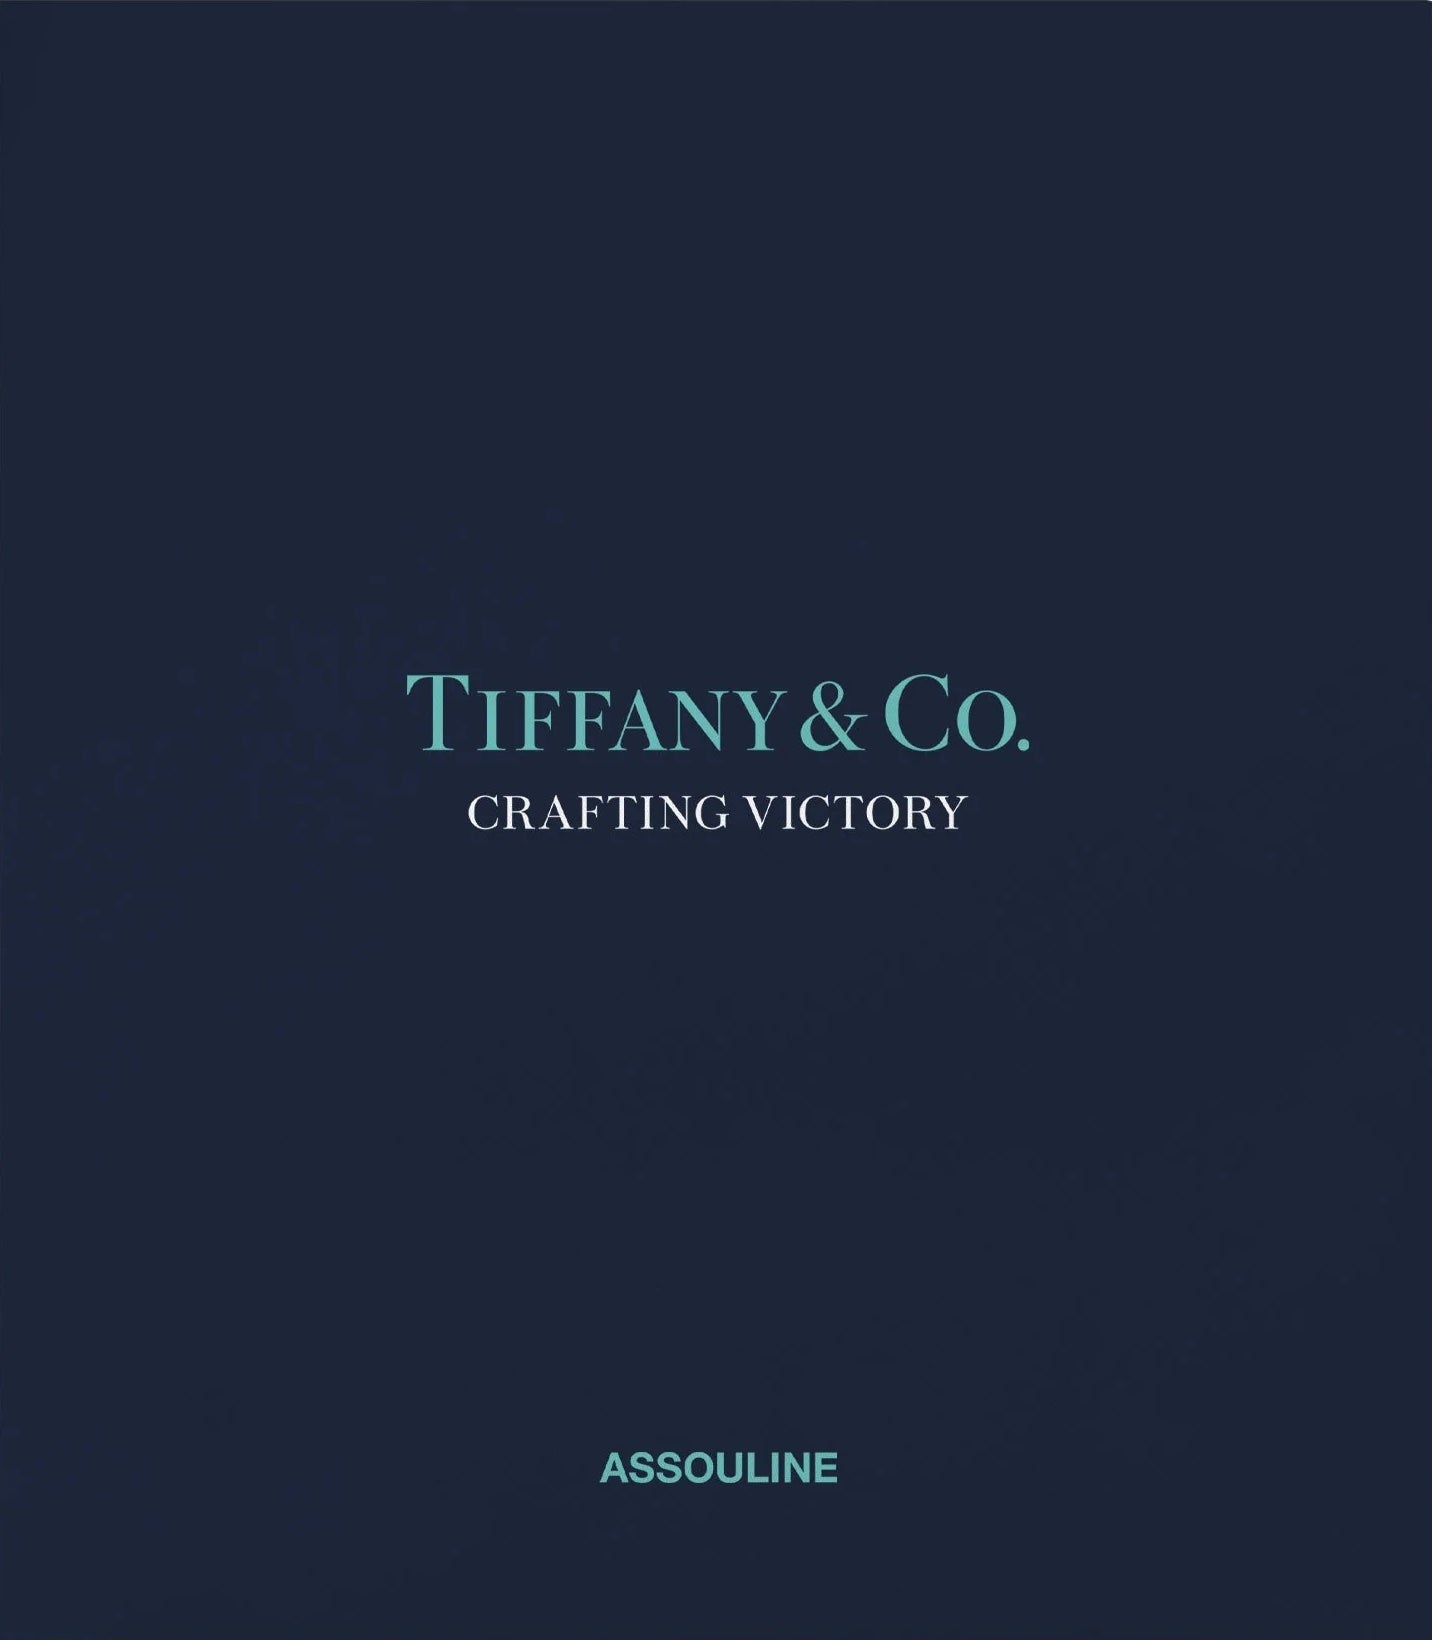 Tiffany & Co. Crafting Victory